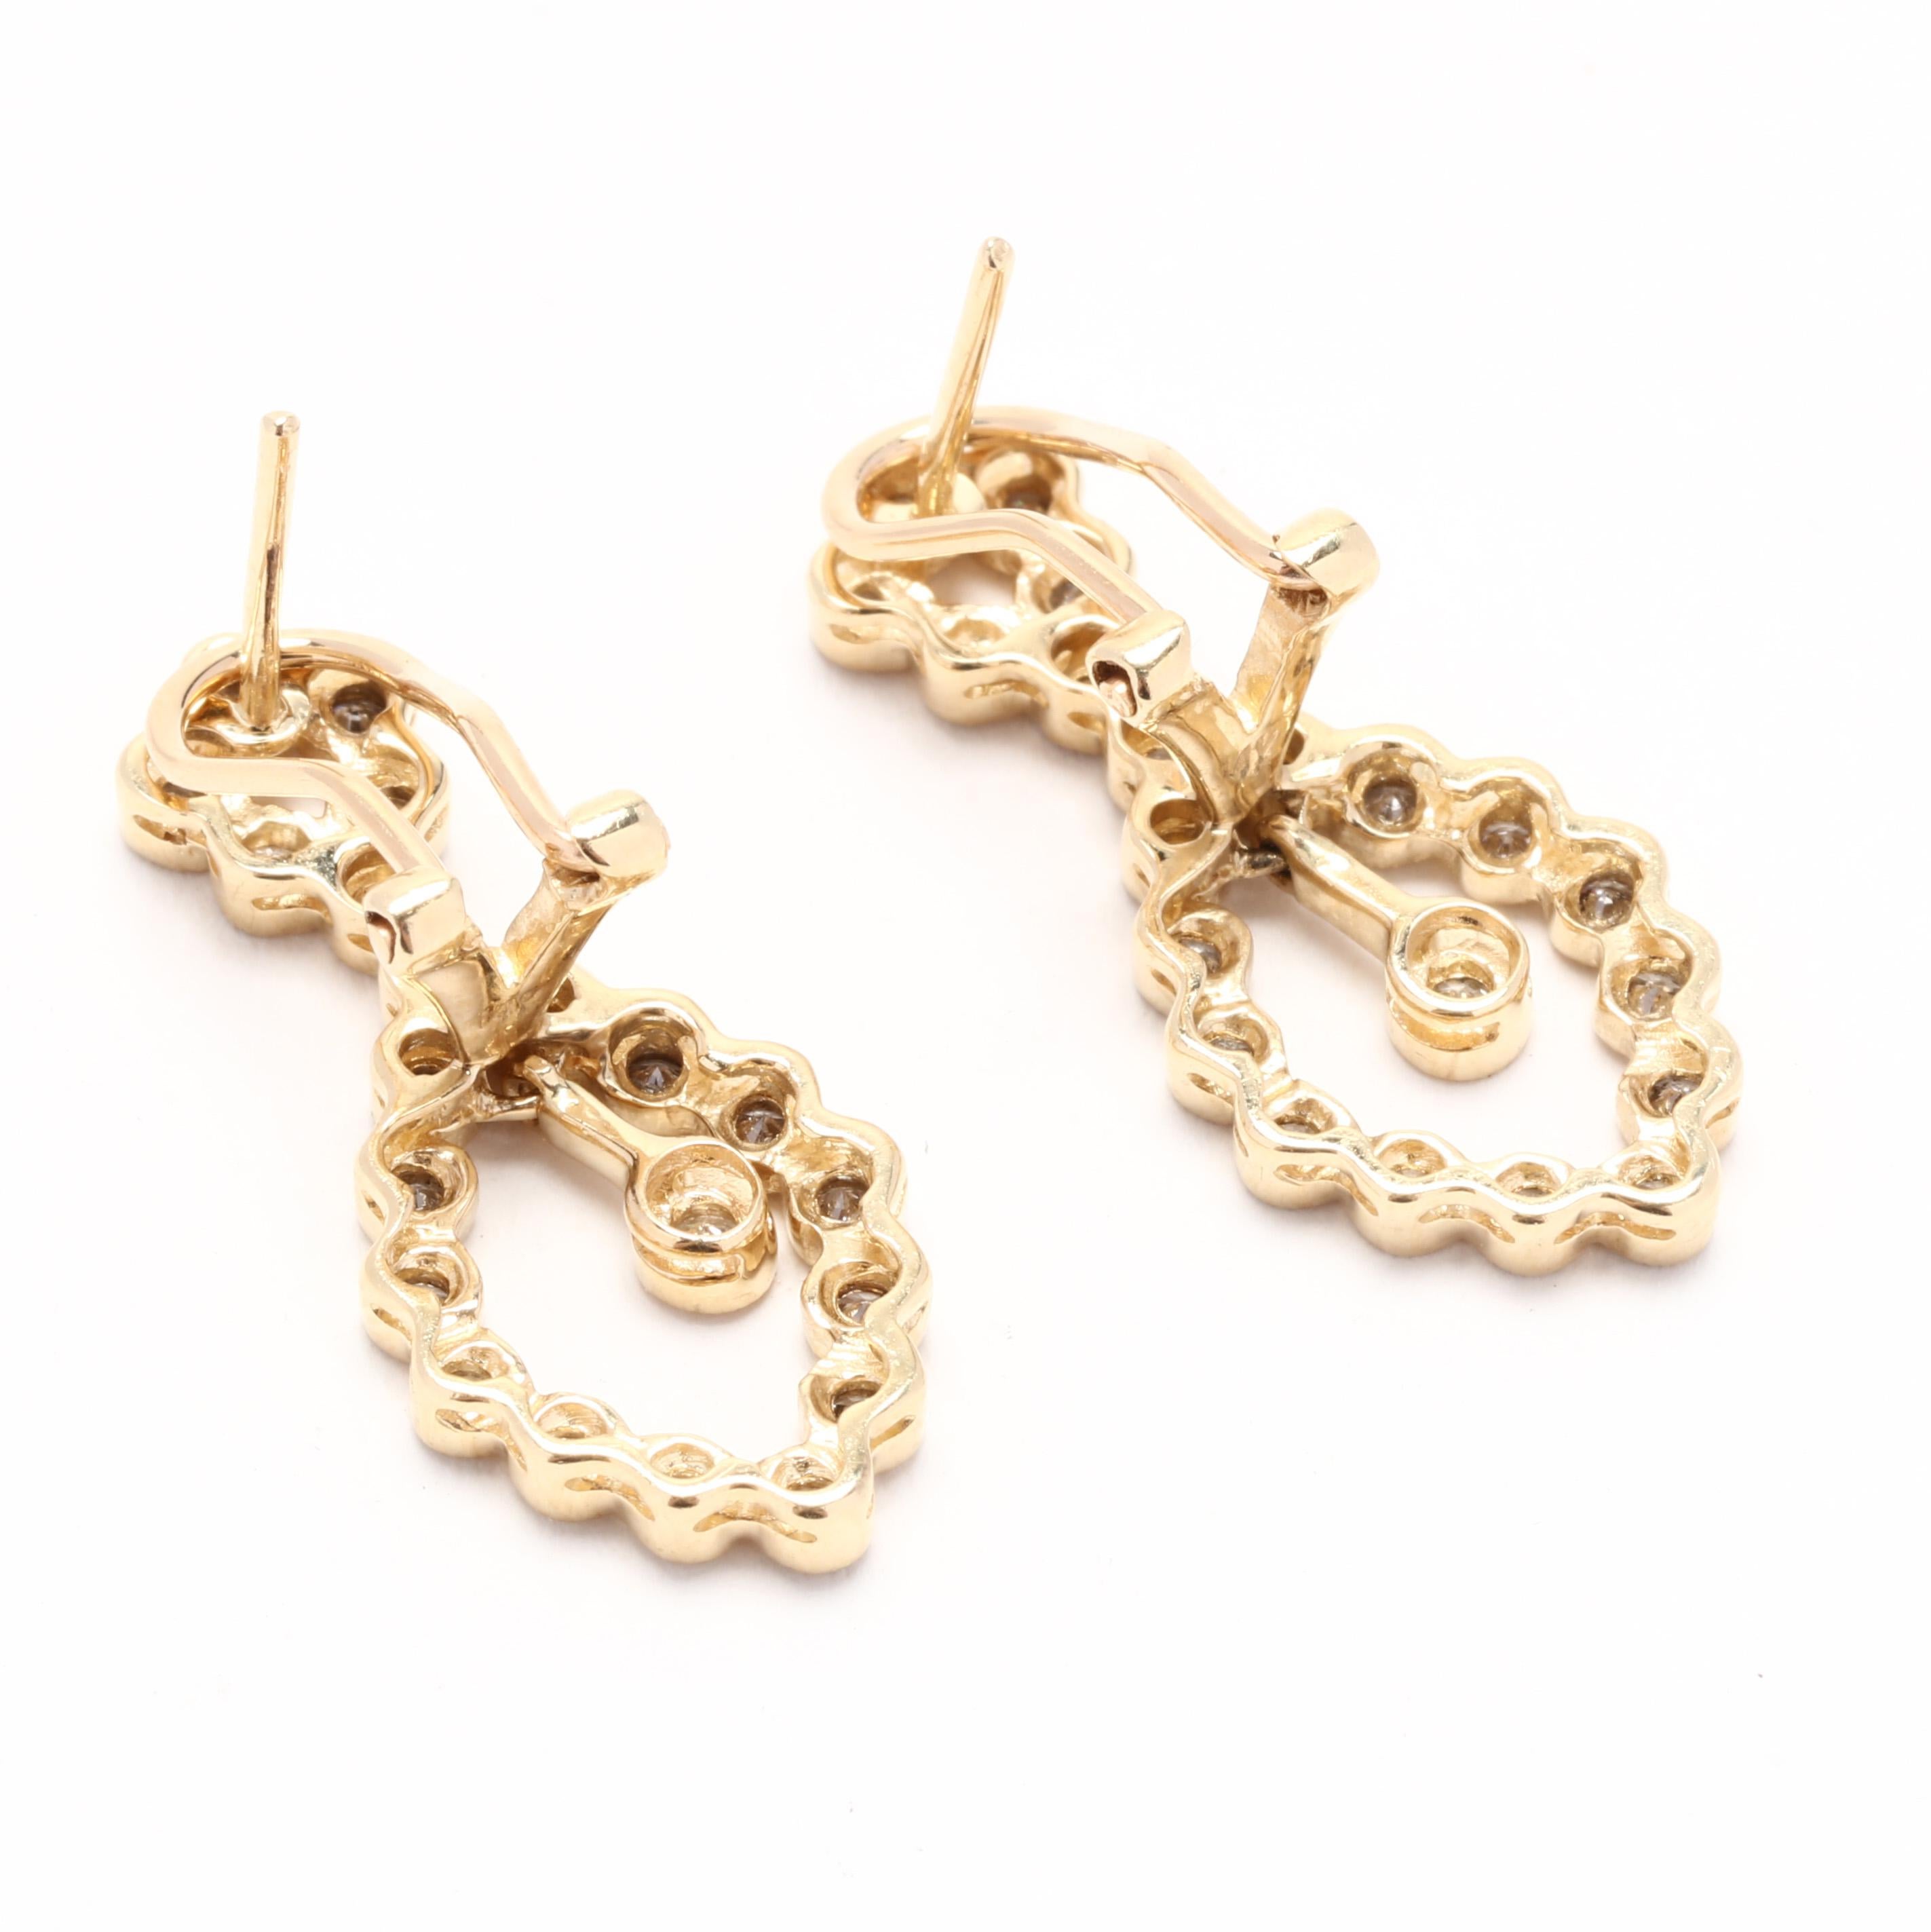 Add a touch of elegance to your look with these 0.75ctw diamond dangle earrings. Made with 14K yellow gold, these earrings feature a stunning cluster of diamonds that glimmer and shine with every movement. With a total carat weight of 0.75ctw, these